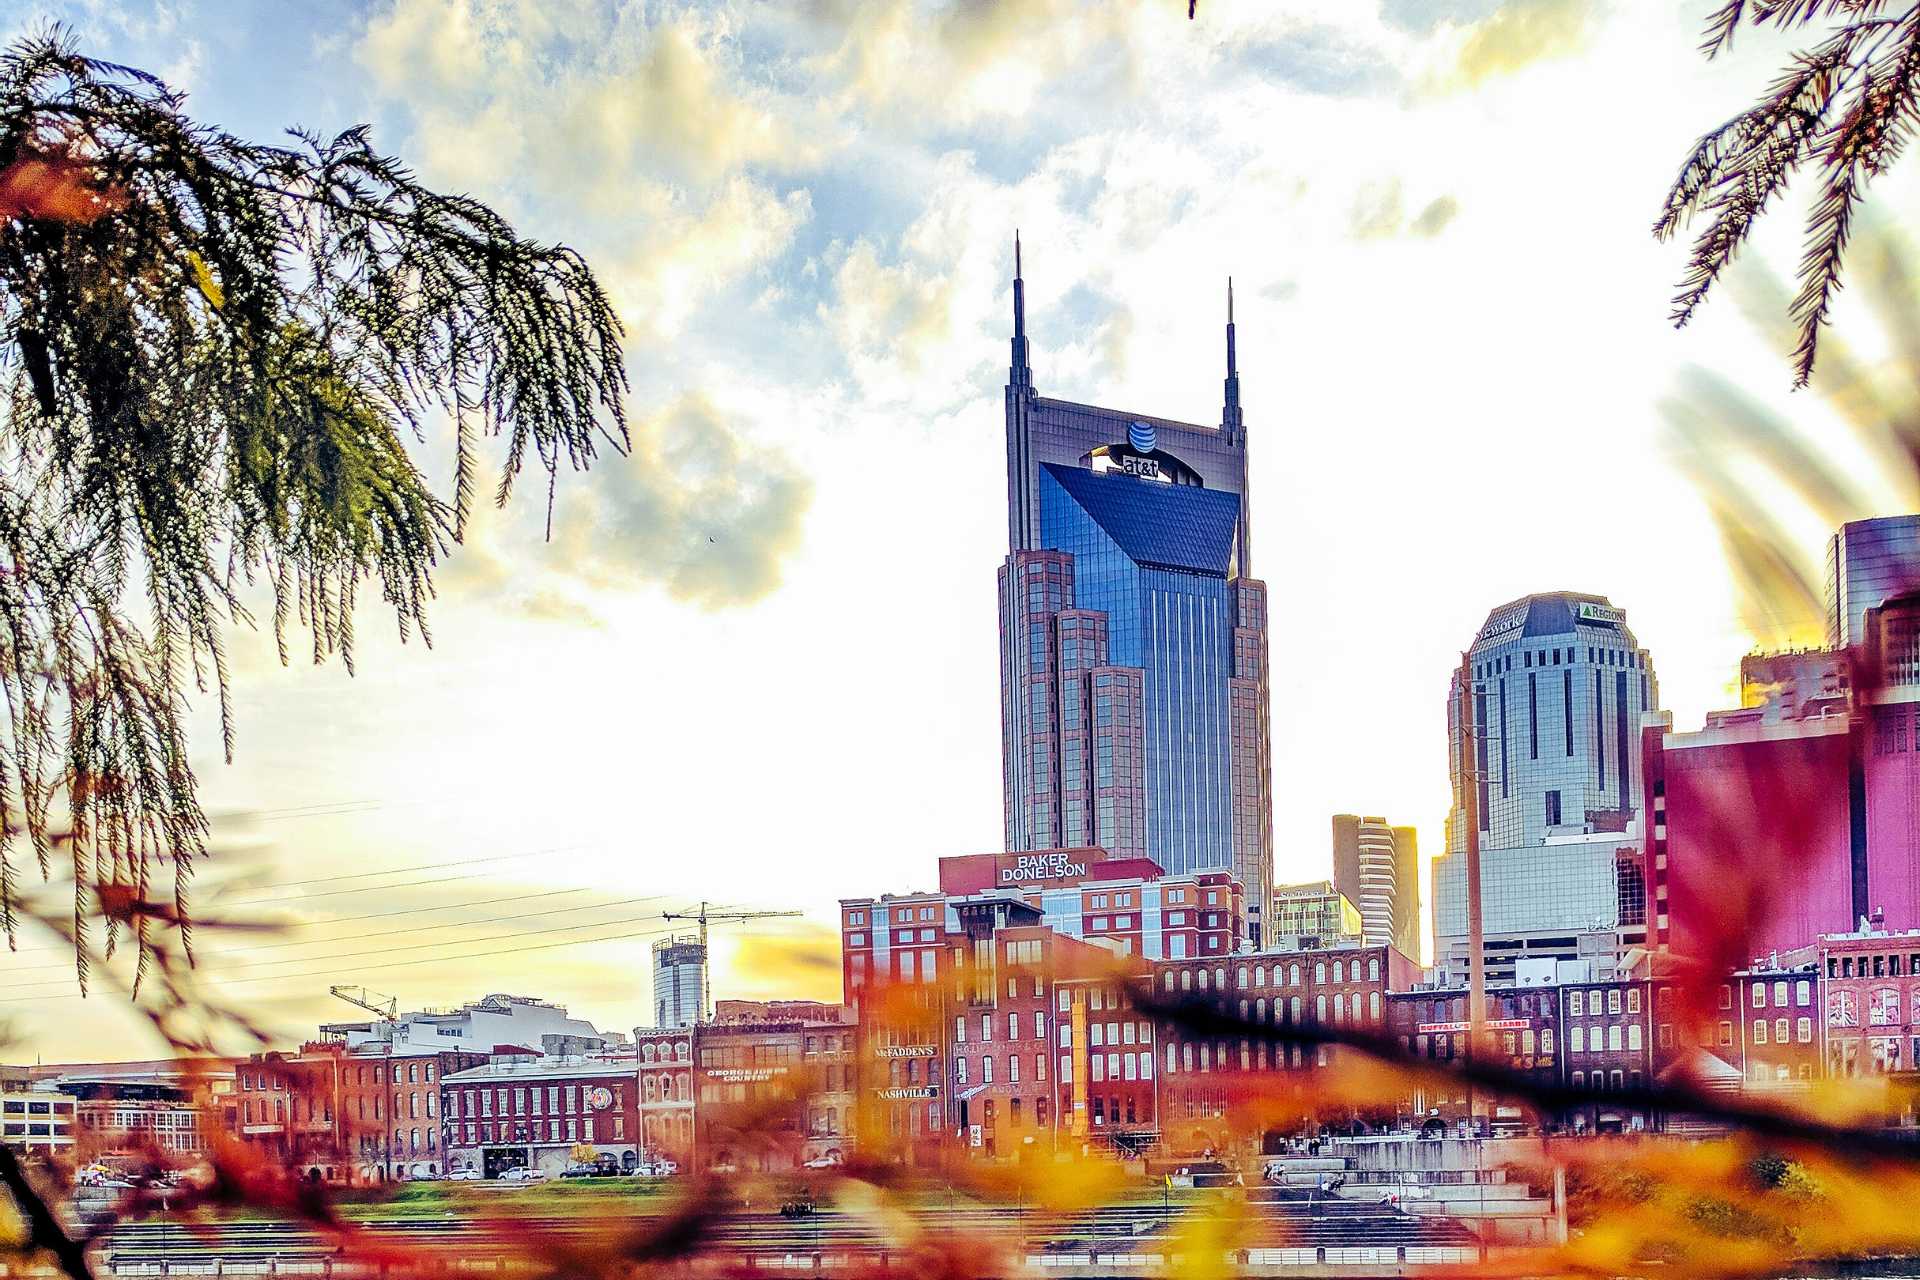 Nashville city skyline from Getty Images